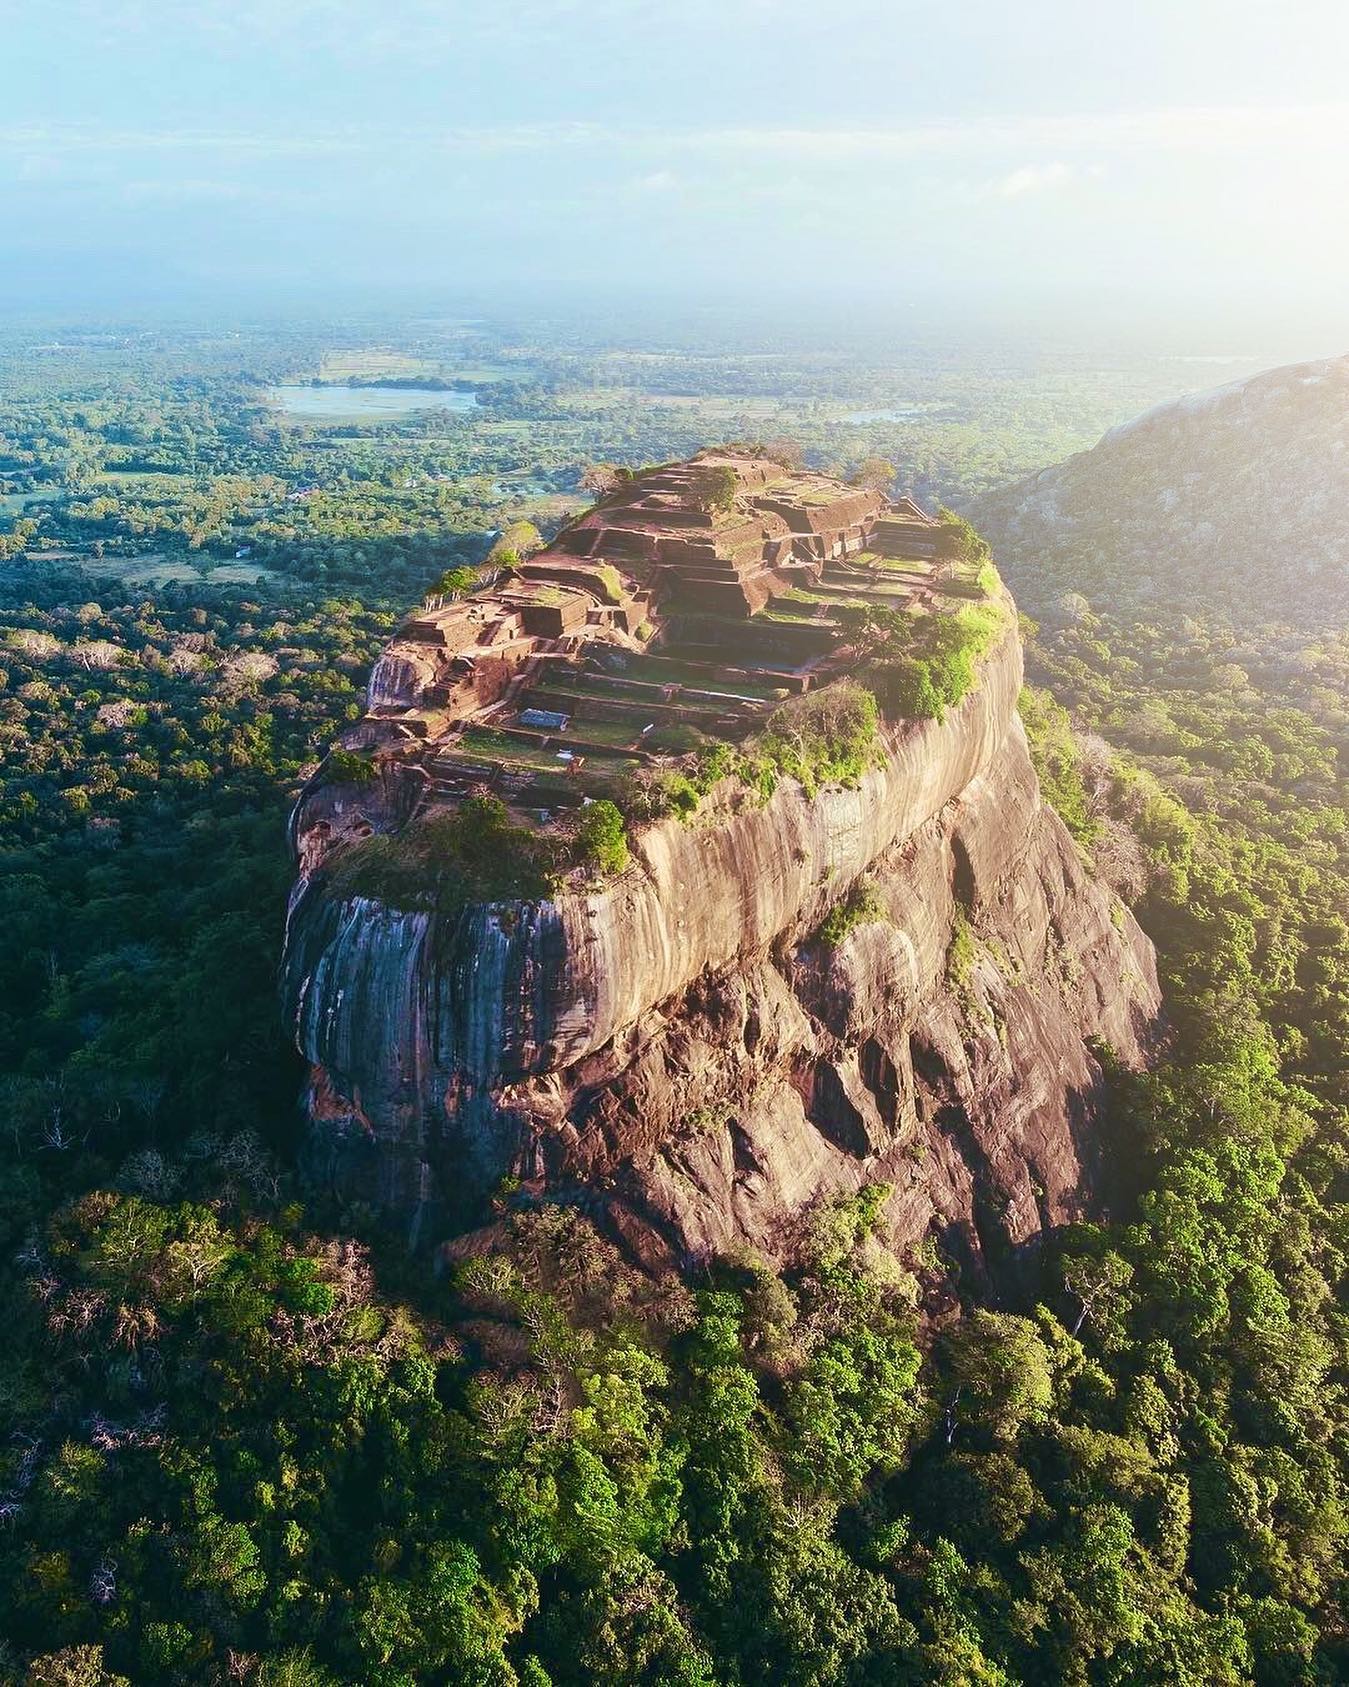 The Lion's Rock in Sigiriya is a monumental feature of Sri Lanka. It's possible to hike to the top of the rock to get a breathtaking view. The Lion's Rock is a part of the UNESCO world heritage since 1982. ⛰
.
.
.
.
#roamtheplanet #eclectic_shotz #moodygrams #mg5k #moodyports #beyondthelands #thegreatplanet #worldplaces #nature_globepix #stayandwander #speechlessplaces #bestdiscovery #dreamingtravel #moodnation #earthoutdoors #earthoutdoors10k #exploringourglobe #wonderlustsrilanka #srilankadaily #feelsrilanka #omgsrilanka #exploresrilanka #visitsrilanka #toursrilanka #vacationinsrilanka #sigiriyarock #sigiriya